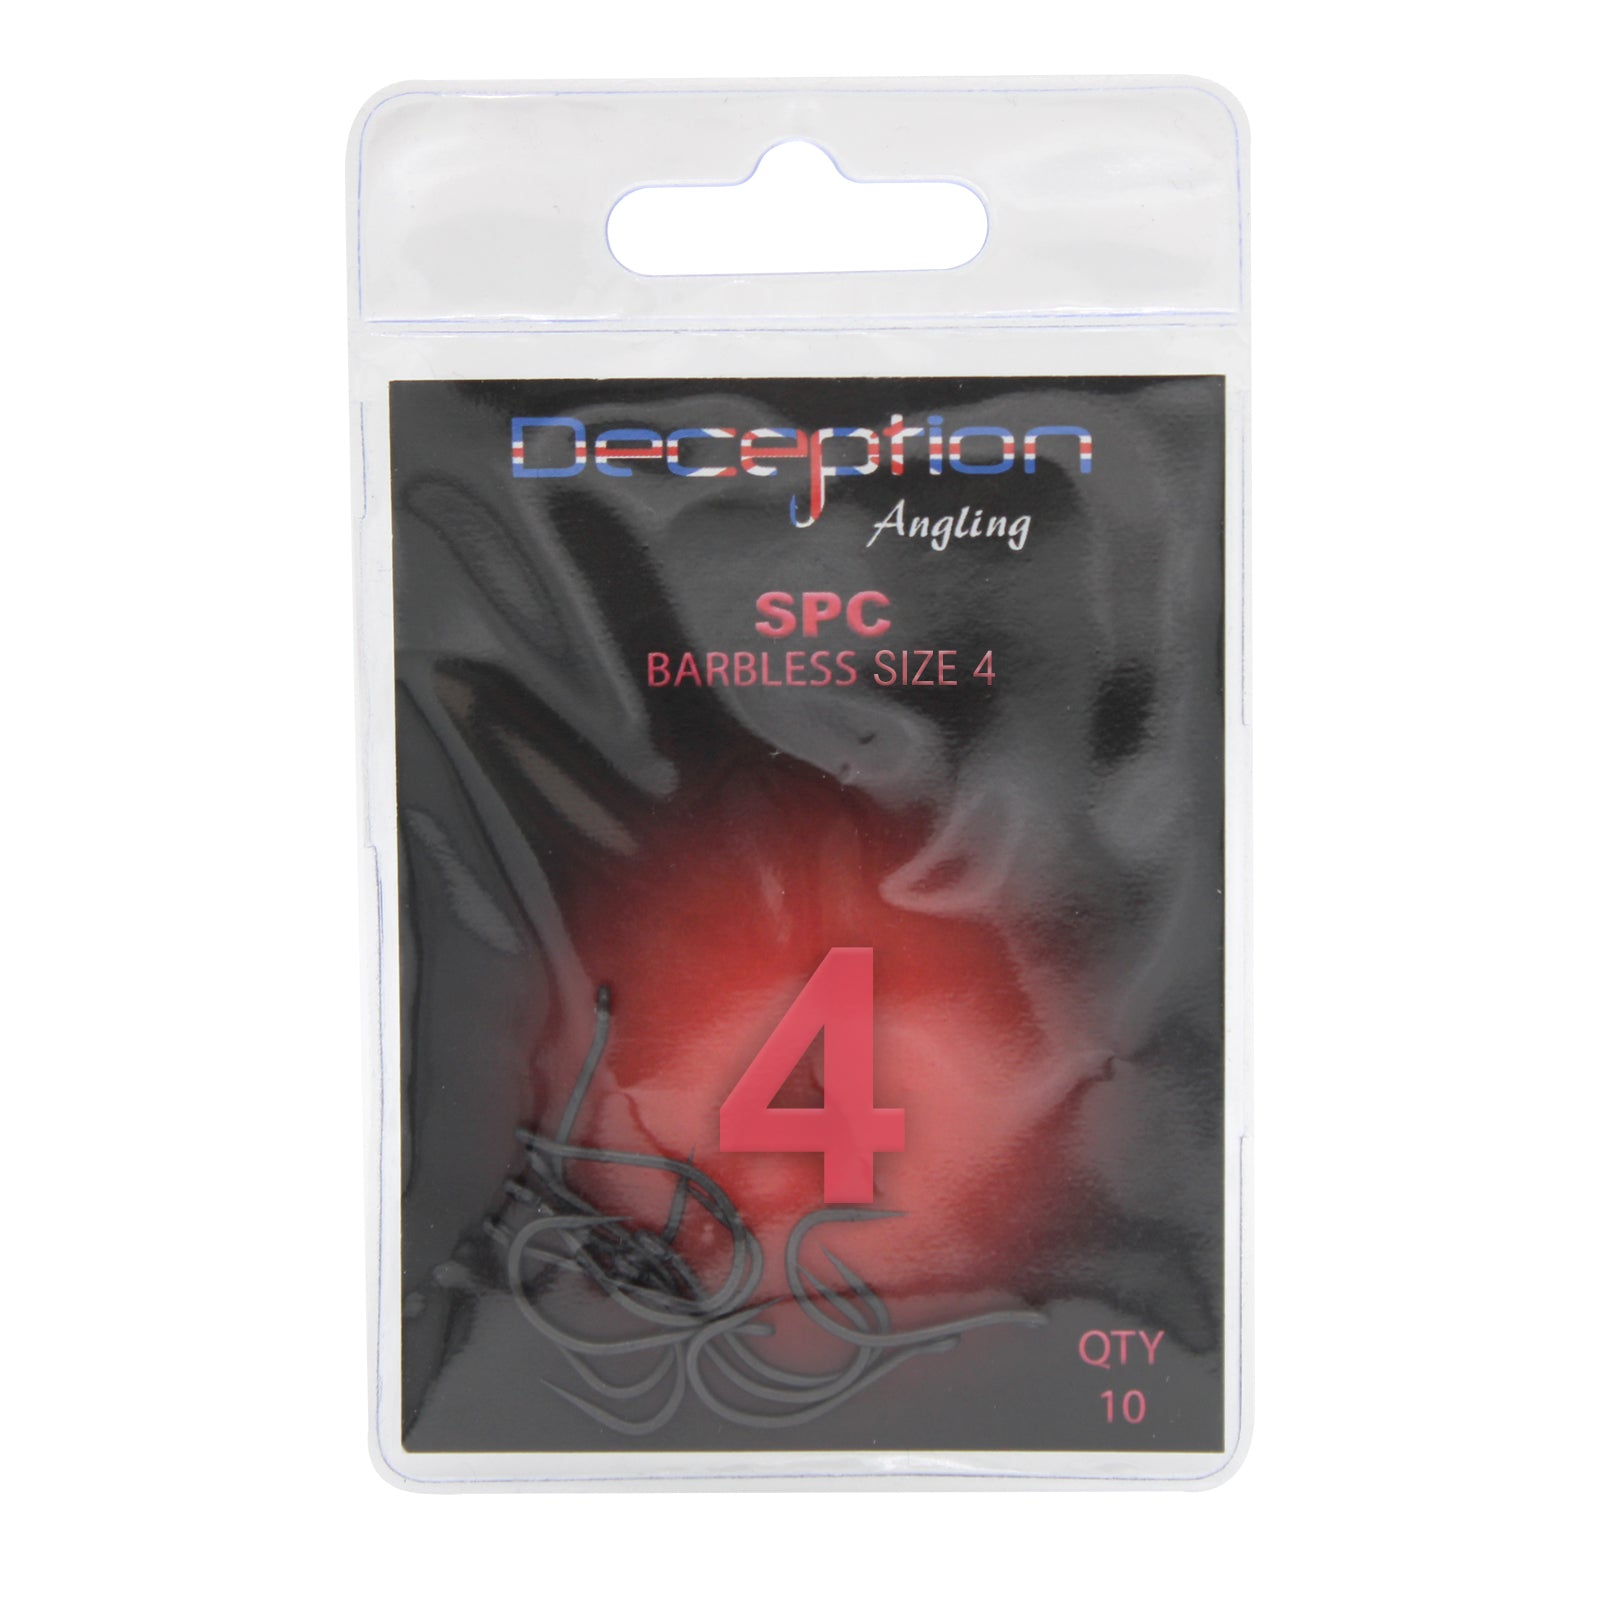 Deception Angling SPC Barbless Pack of 10 Fishing Hooks Size 4